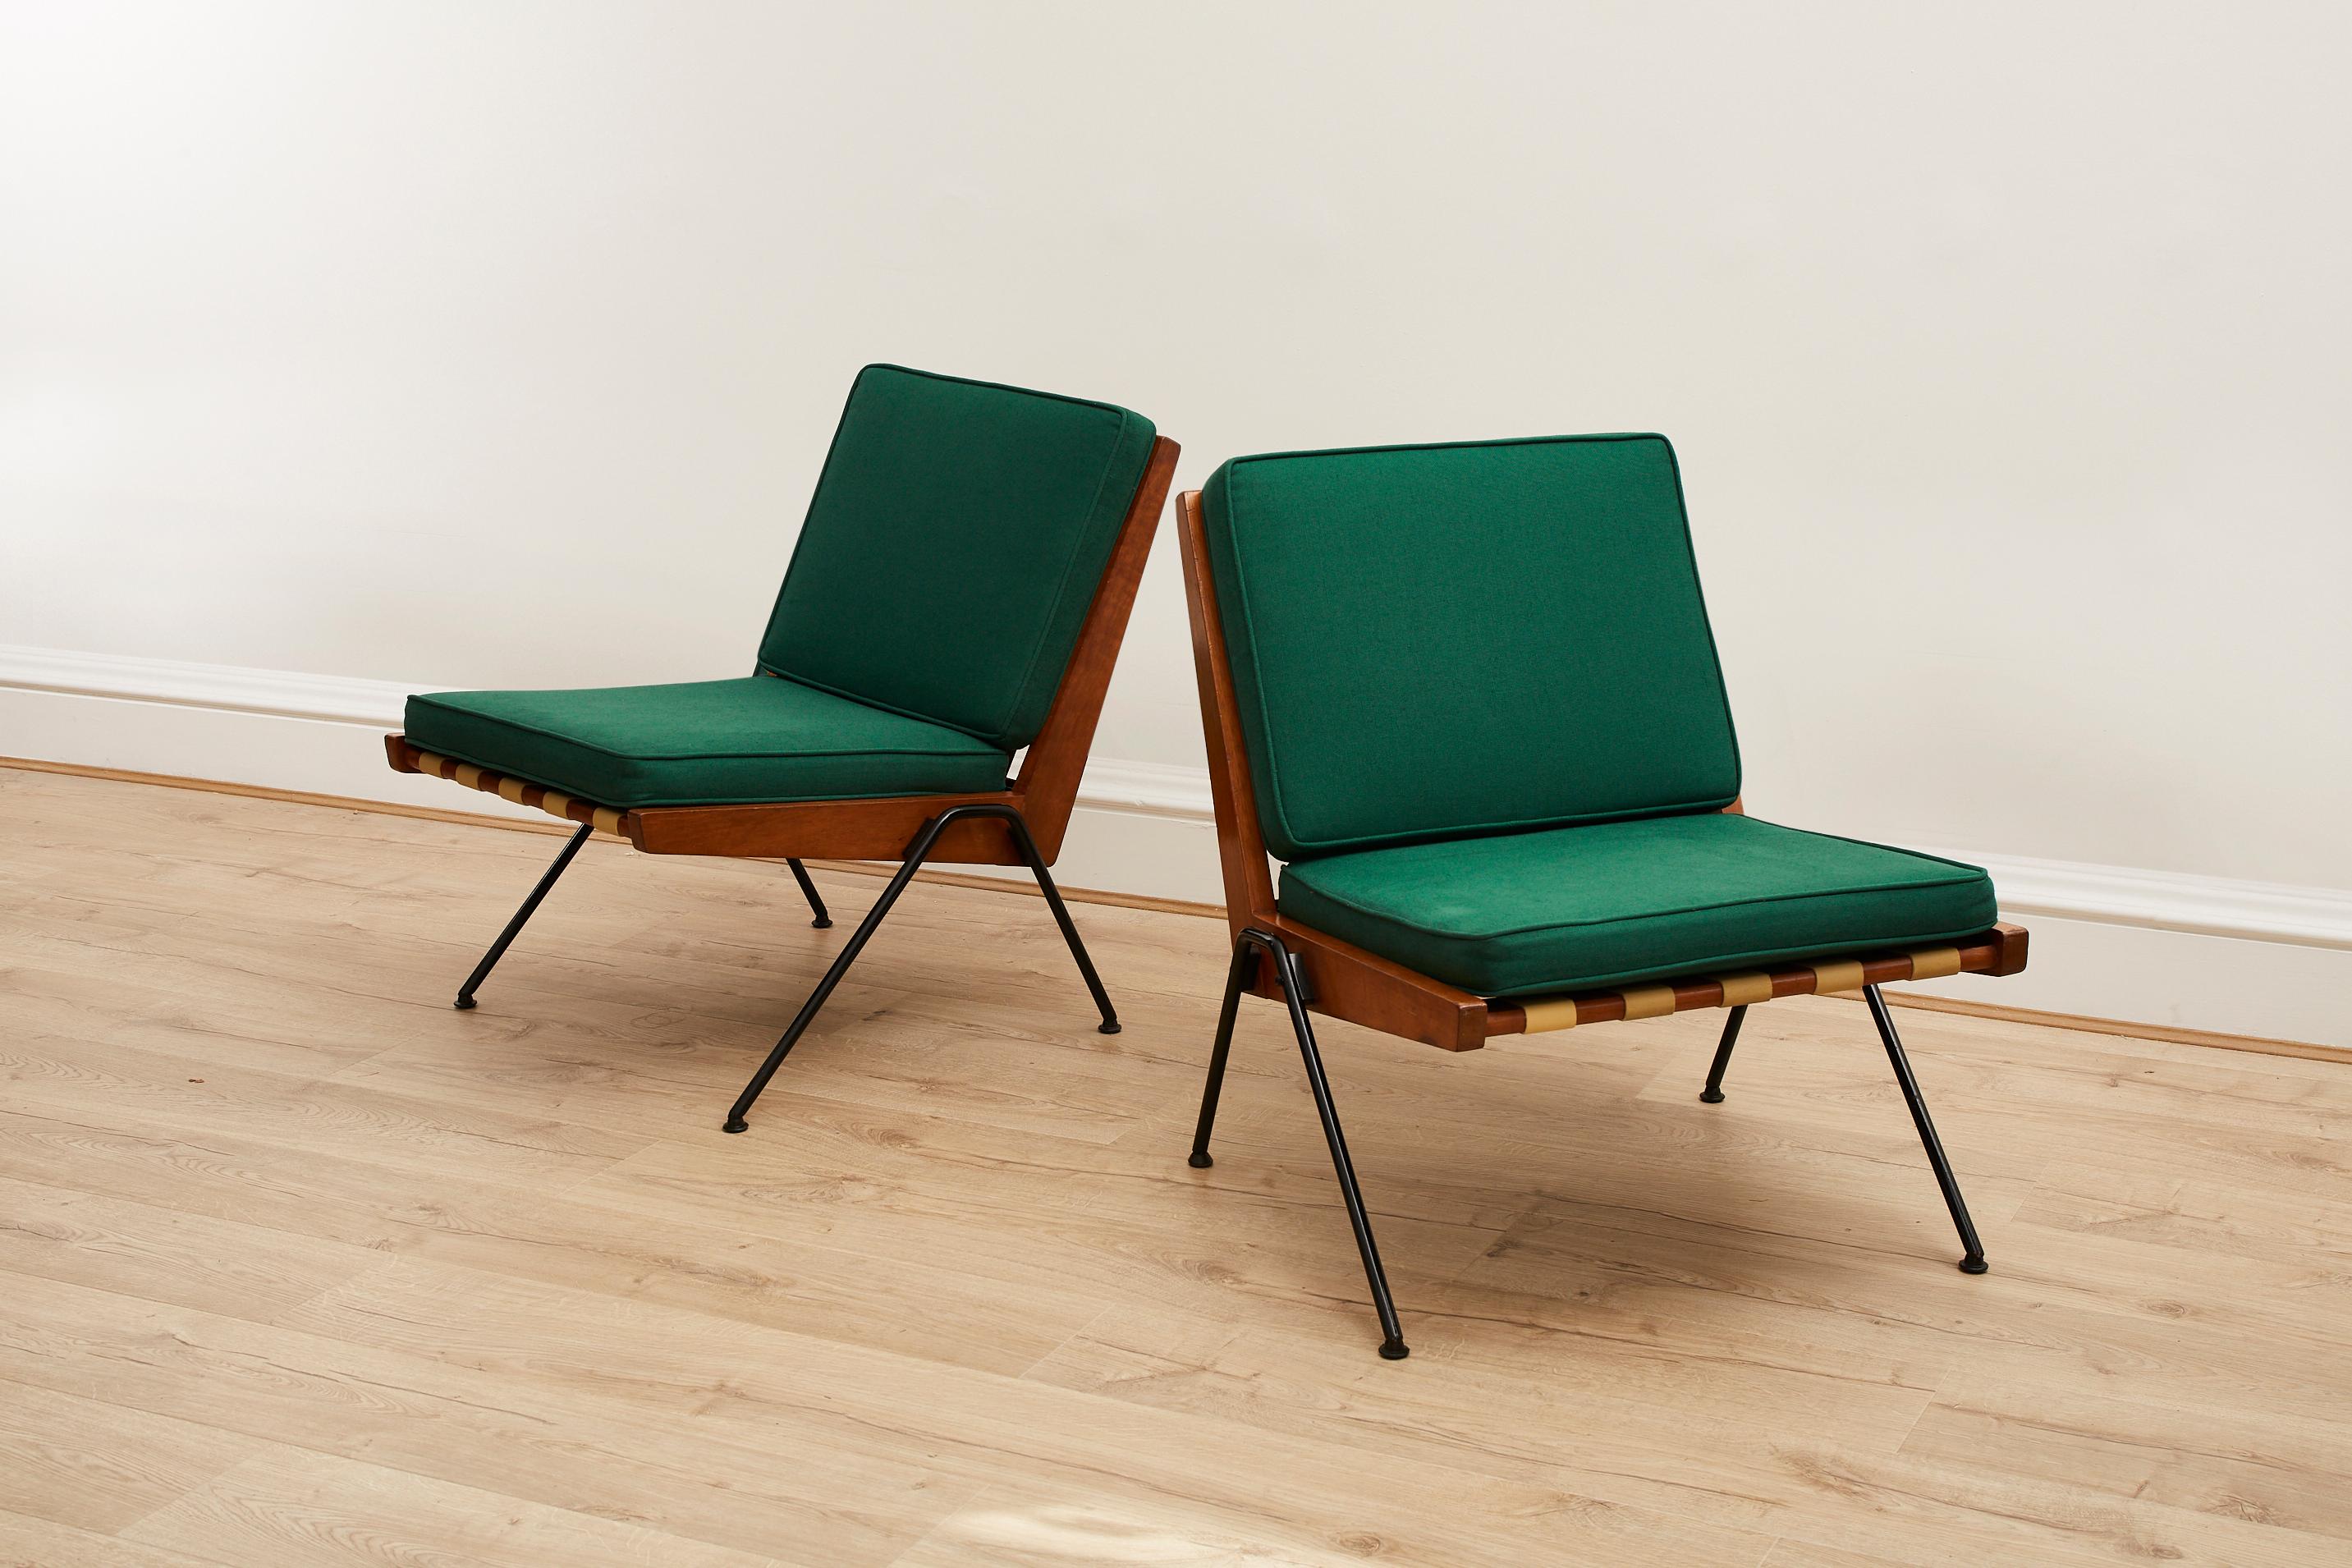 British Pair of Chevron Chairs by Robin Day for Hille, 1950s